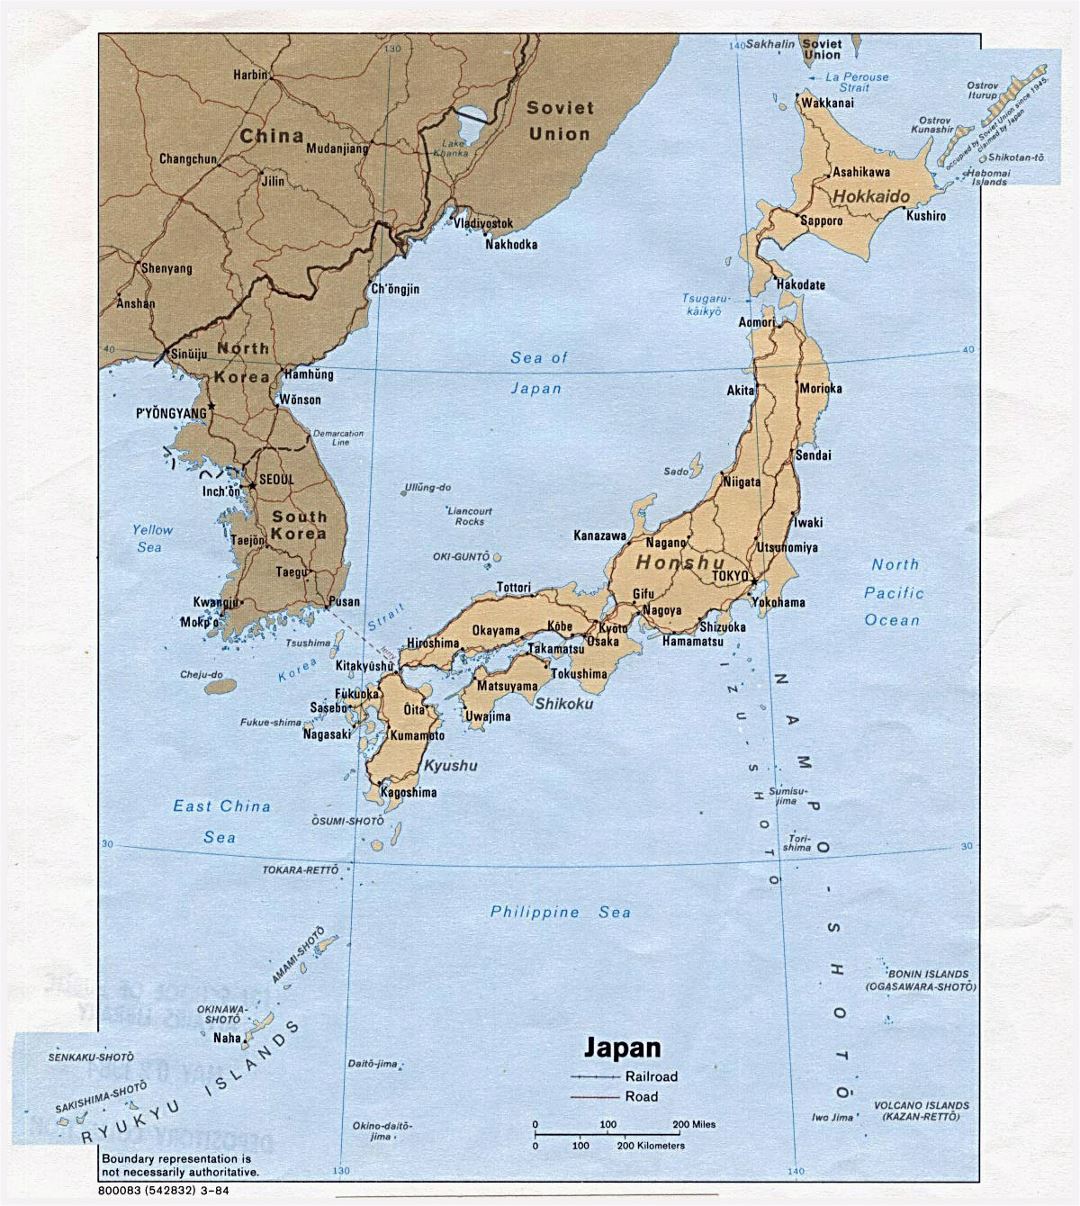 Detailed political map of Japan with roads, railroads and major cities - 1984